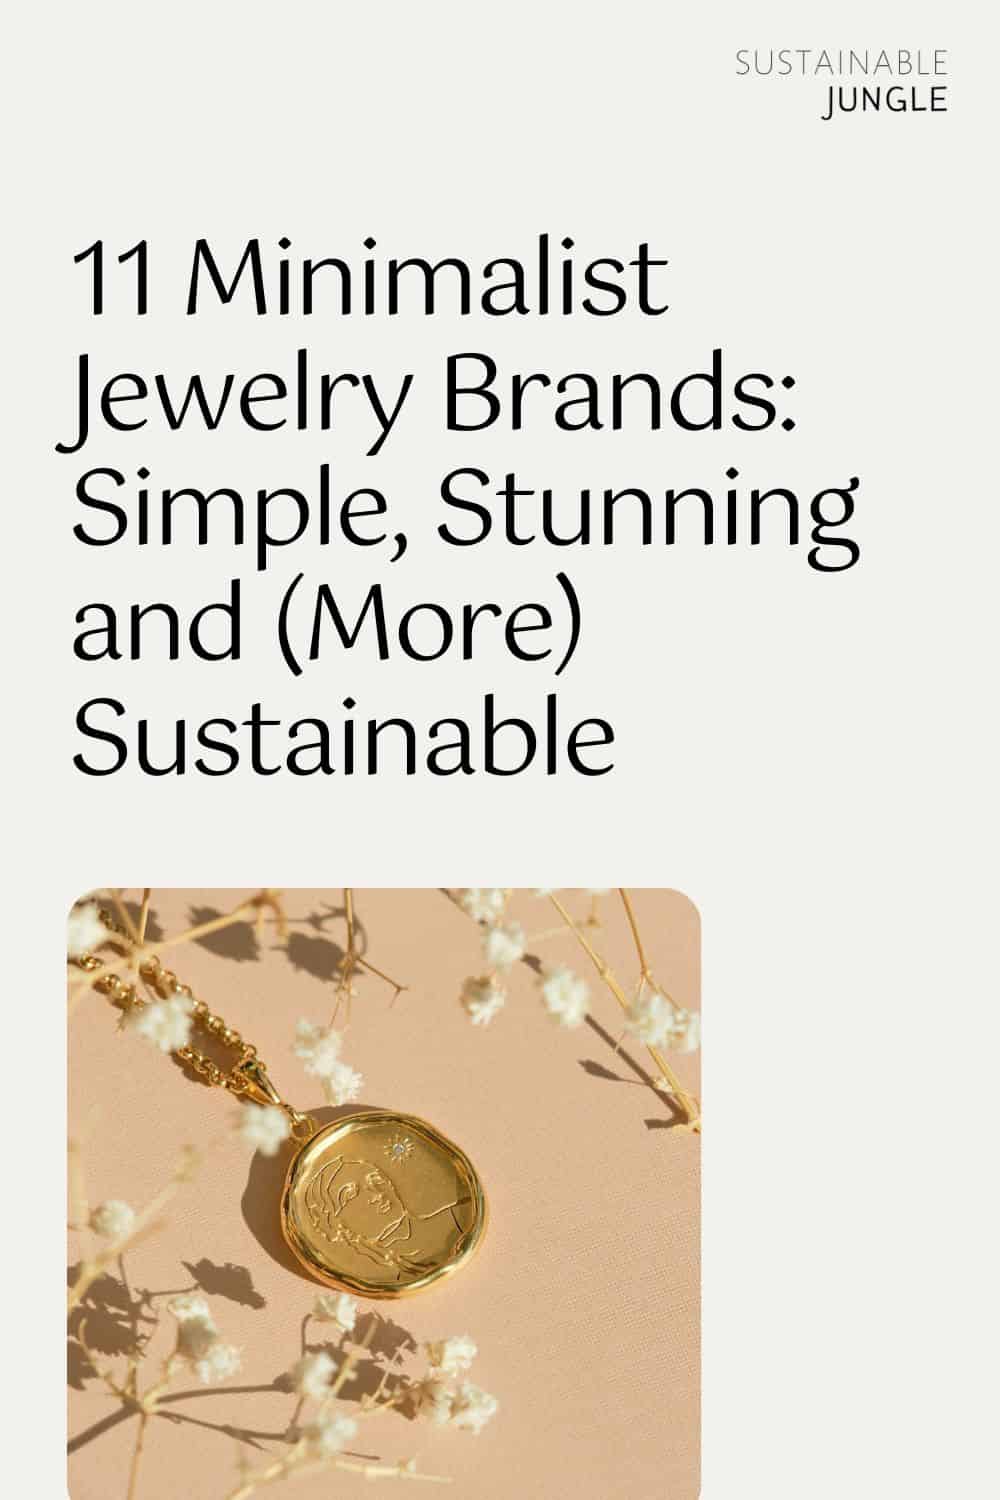 11 Minimalist Jewelry Brands: Simple, Stunning and (More) Sustainable Image by Common Era #minimalistjewelry #sustainablejungle